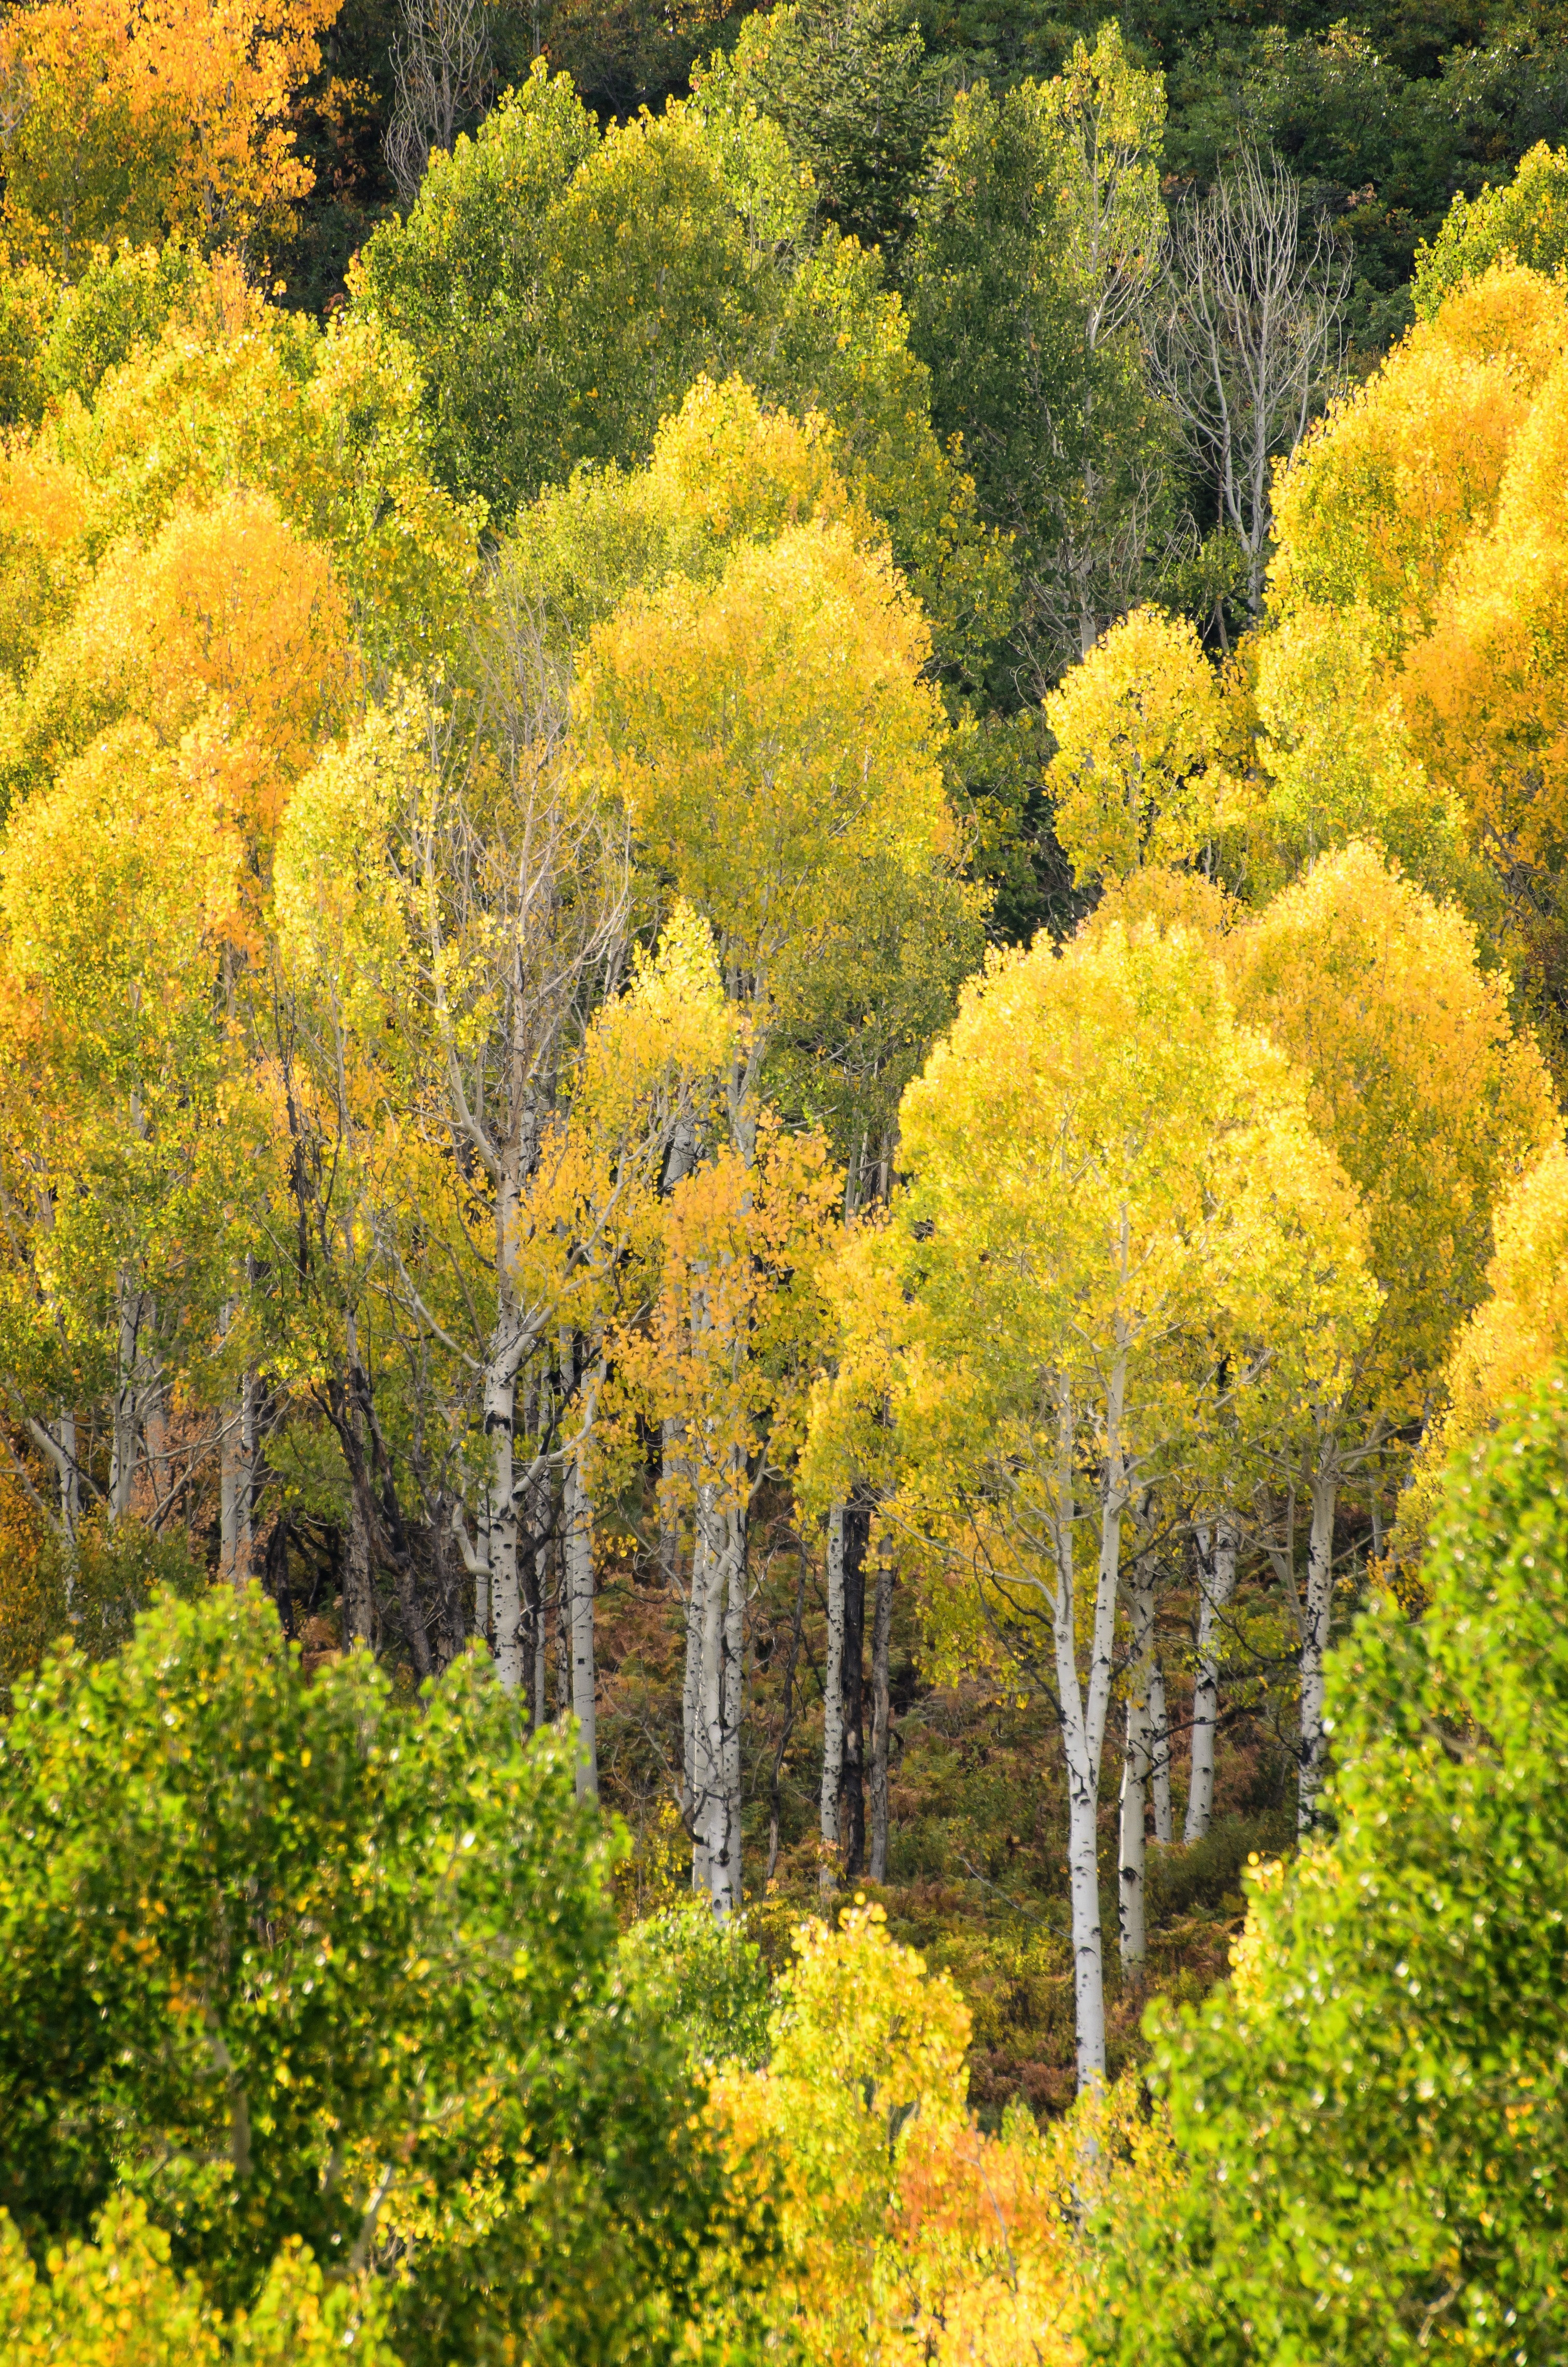 A grove of aspen trees with leaves changing from green to bright yellow in the autumn.